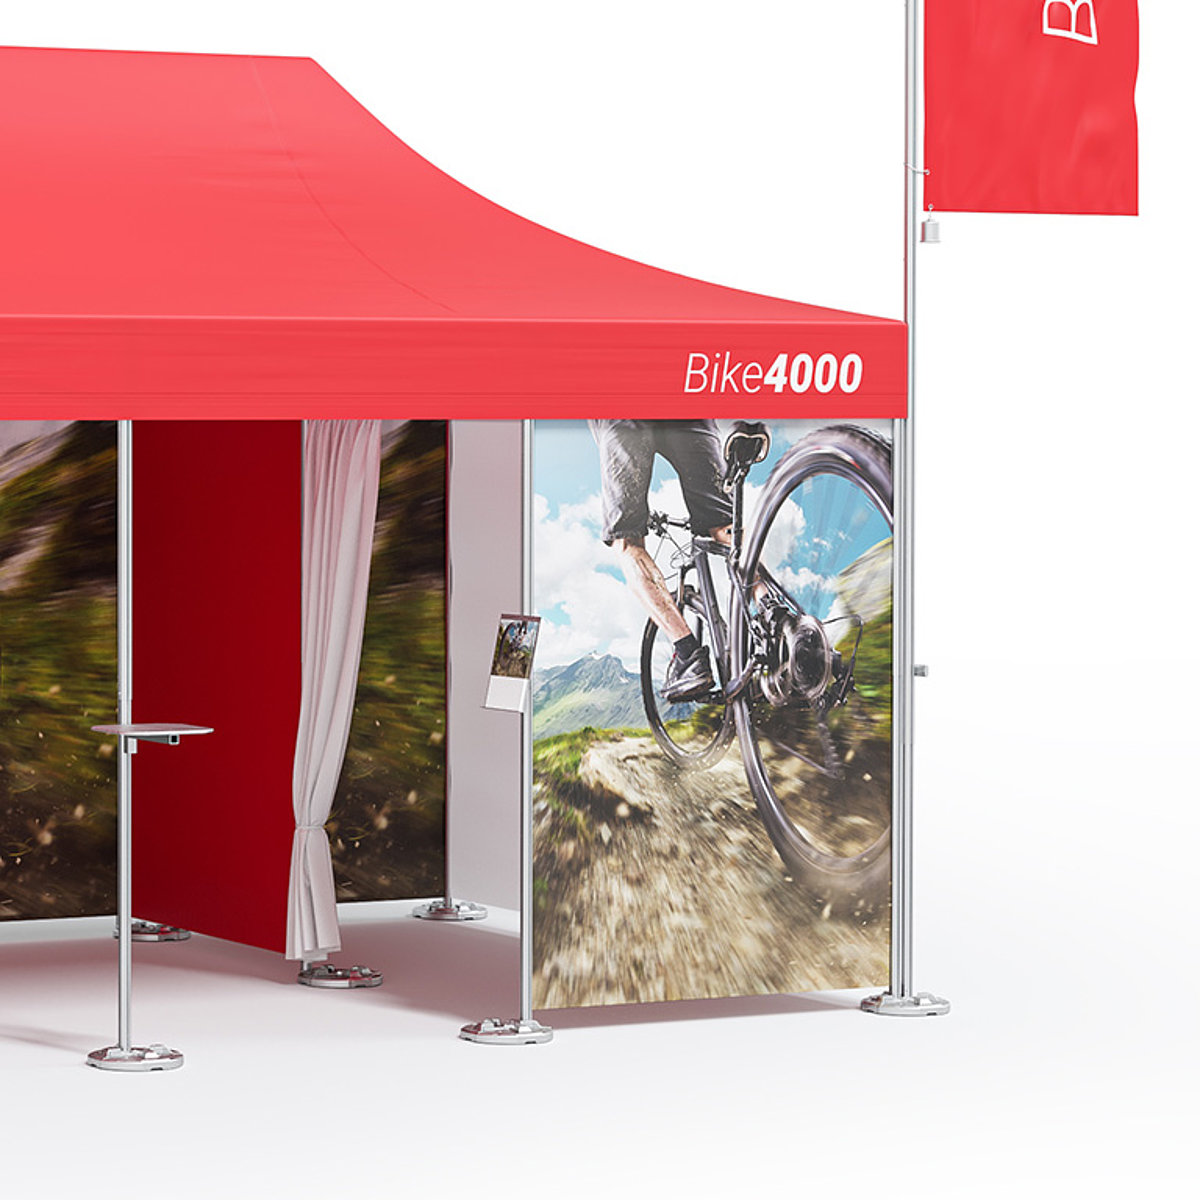 A cabin creates demarcated space in a folding tent as an accessory.